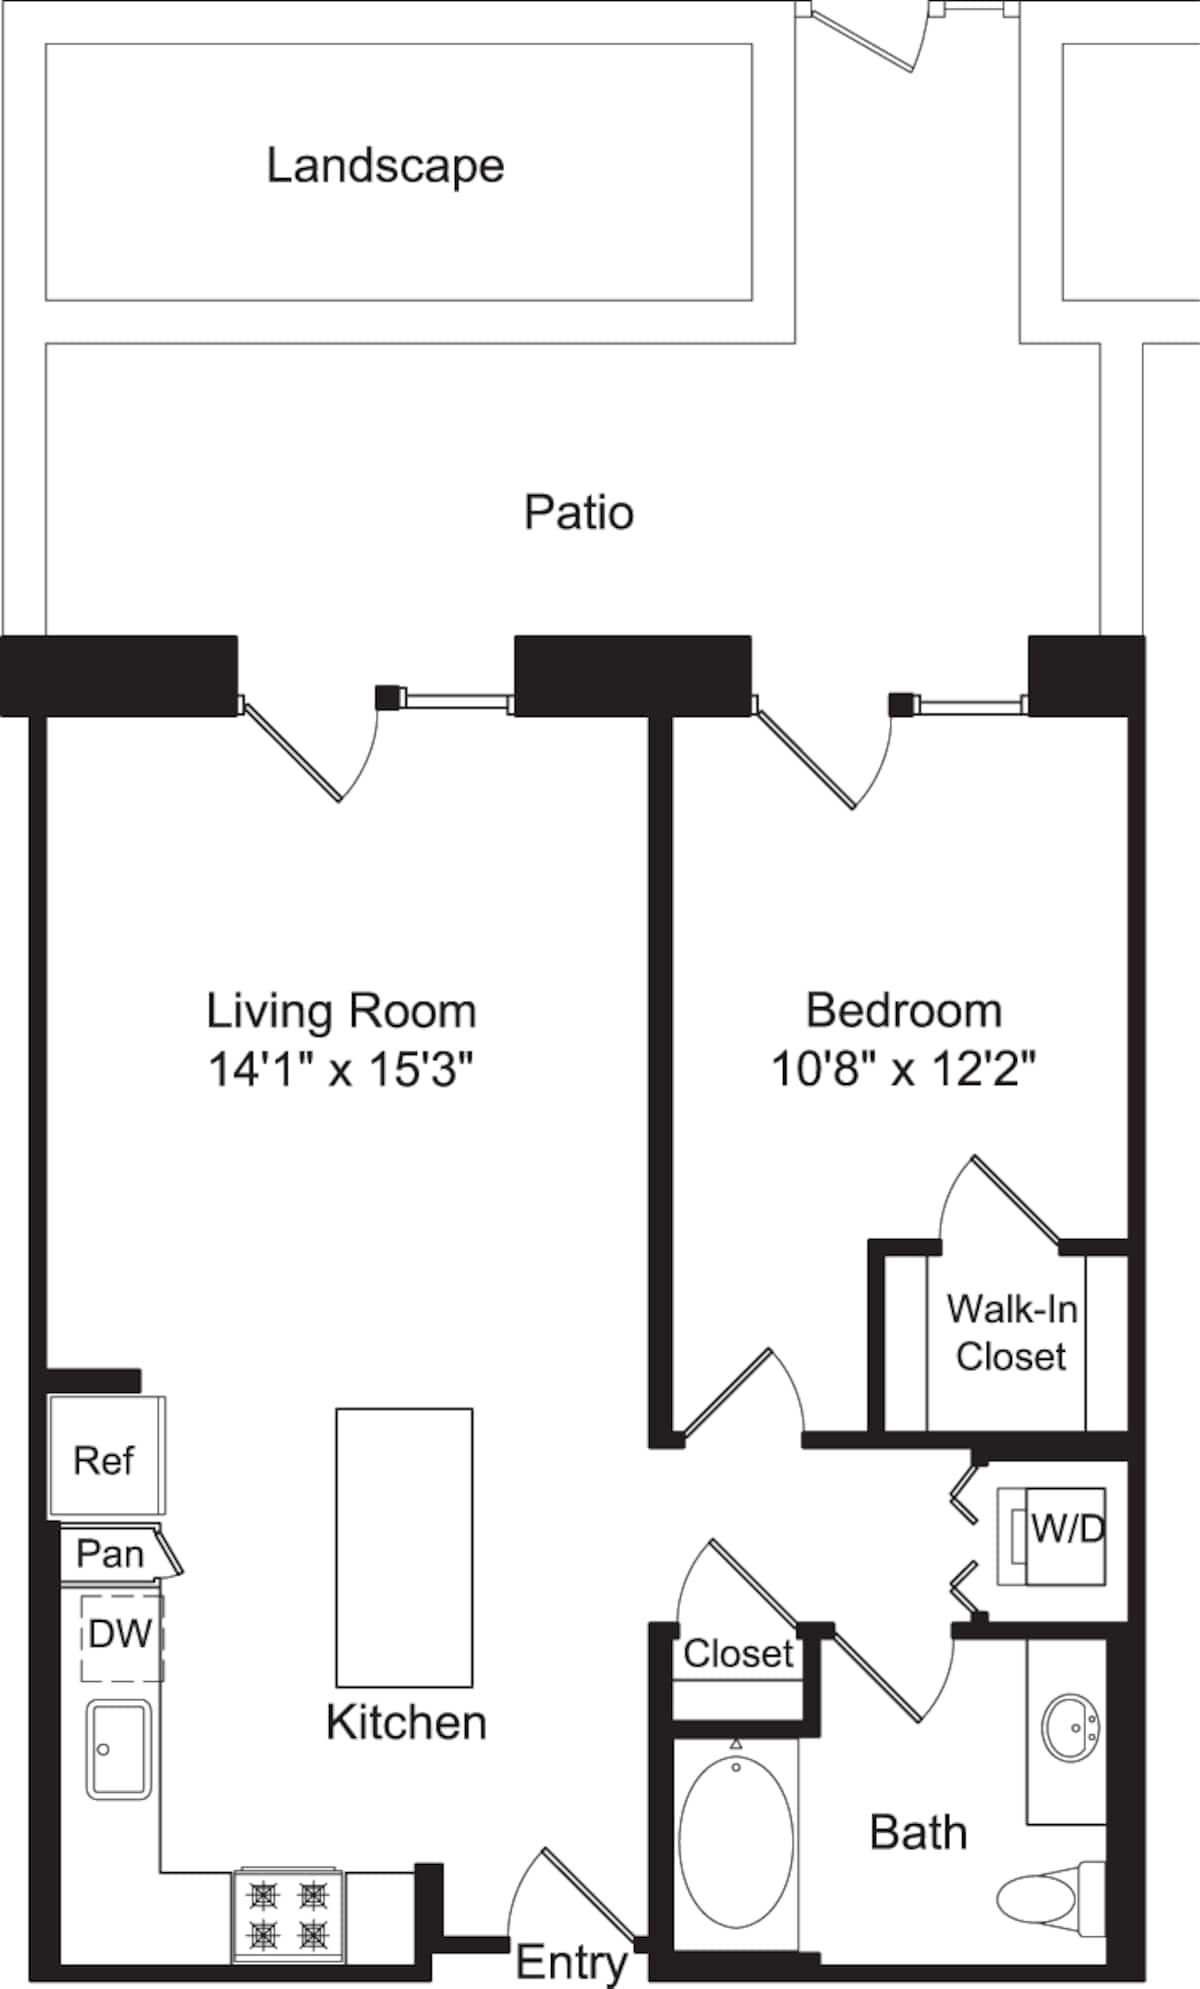 Floorplan diagram for One Bed A4 with Patio, showing 1 bedroom